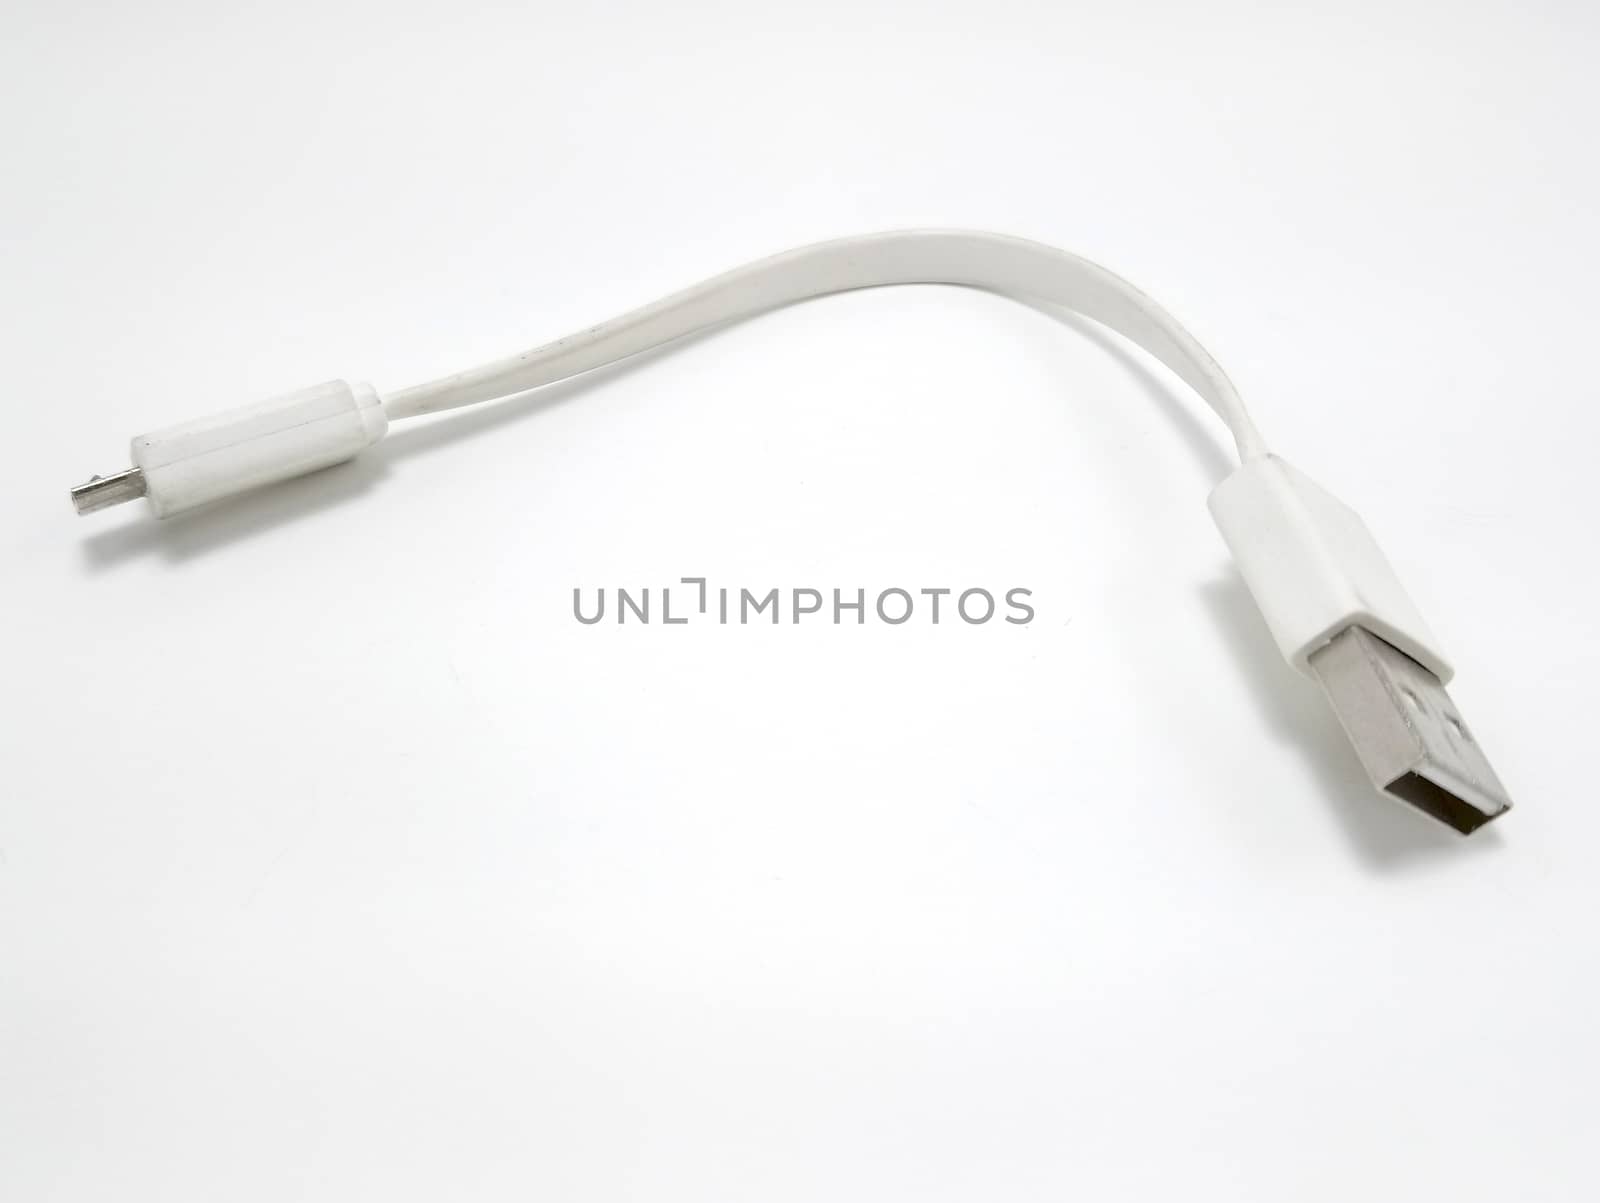 Universal Serial Bus (USB) cord in Quezon City, Philippines by imwaltersy